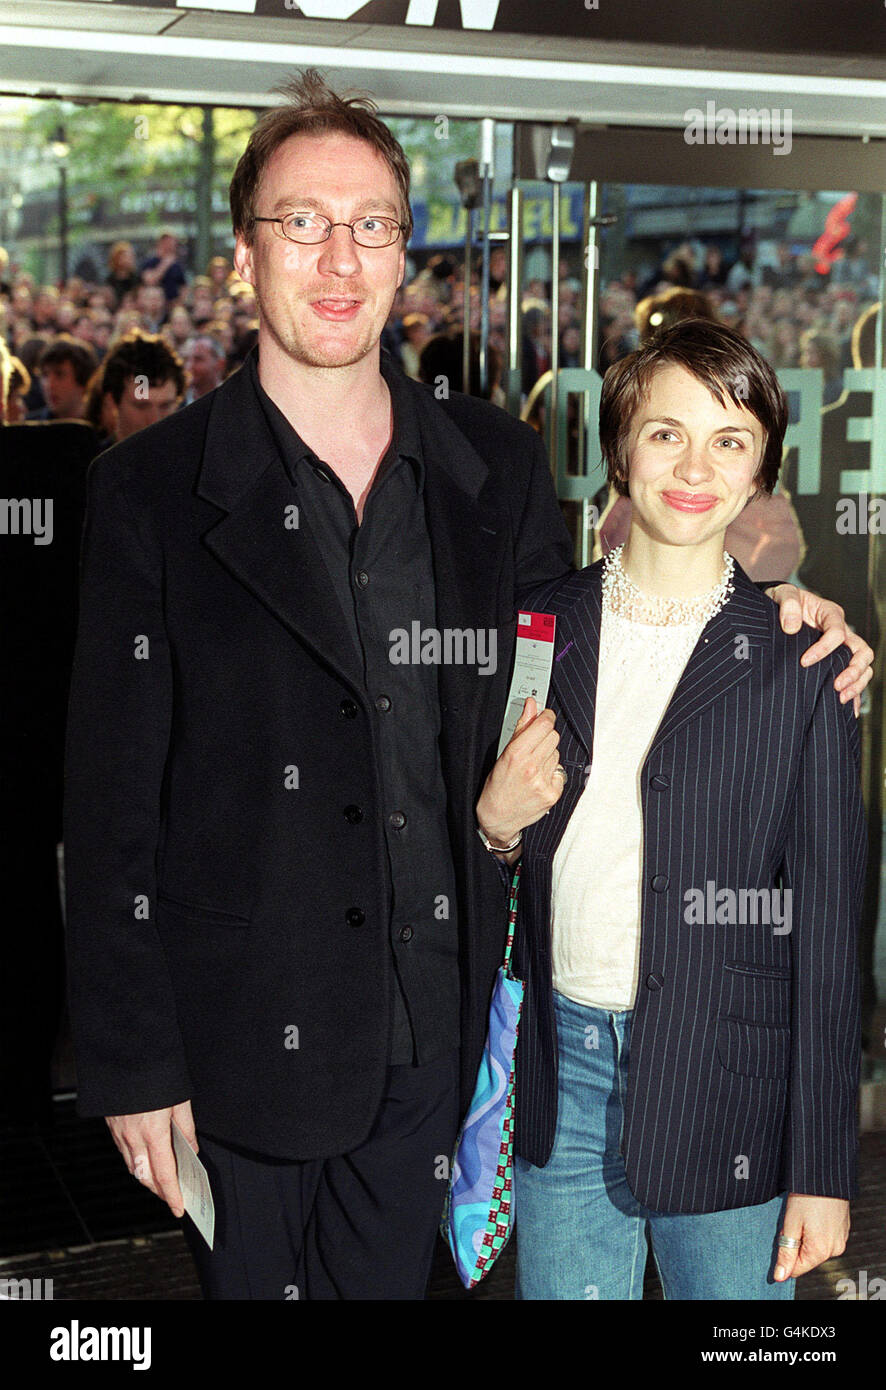 Actors David Thewlis and Kate Hardie arriving for the World Premiere of ...